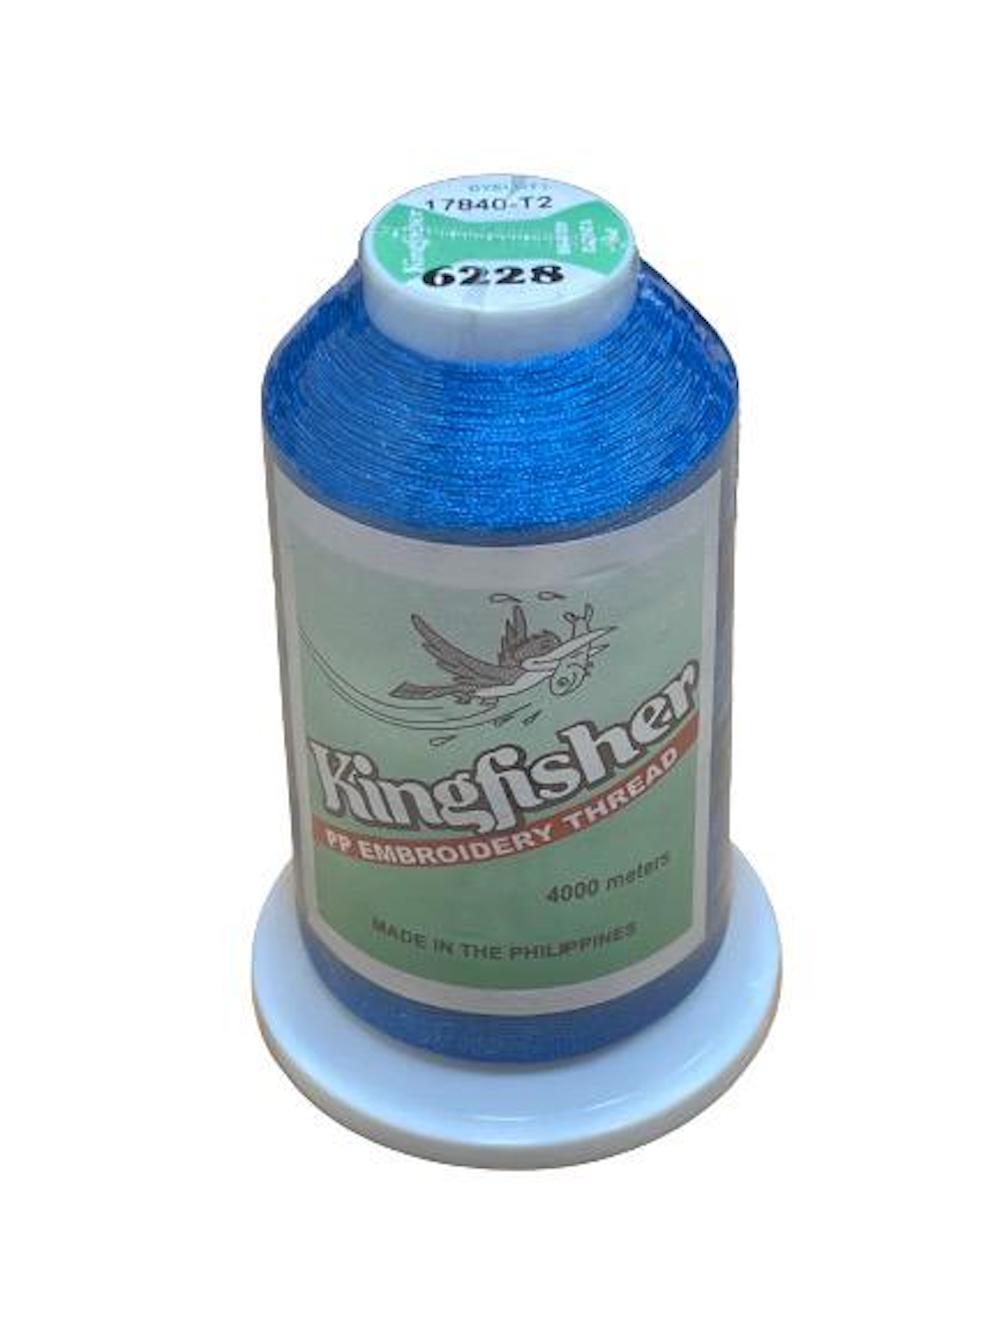 King Fisher Embroidery Thread 4000m 6228 - MY SEWING MALL